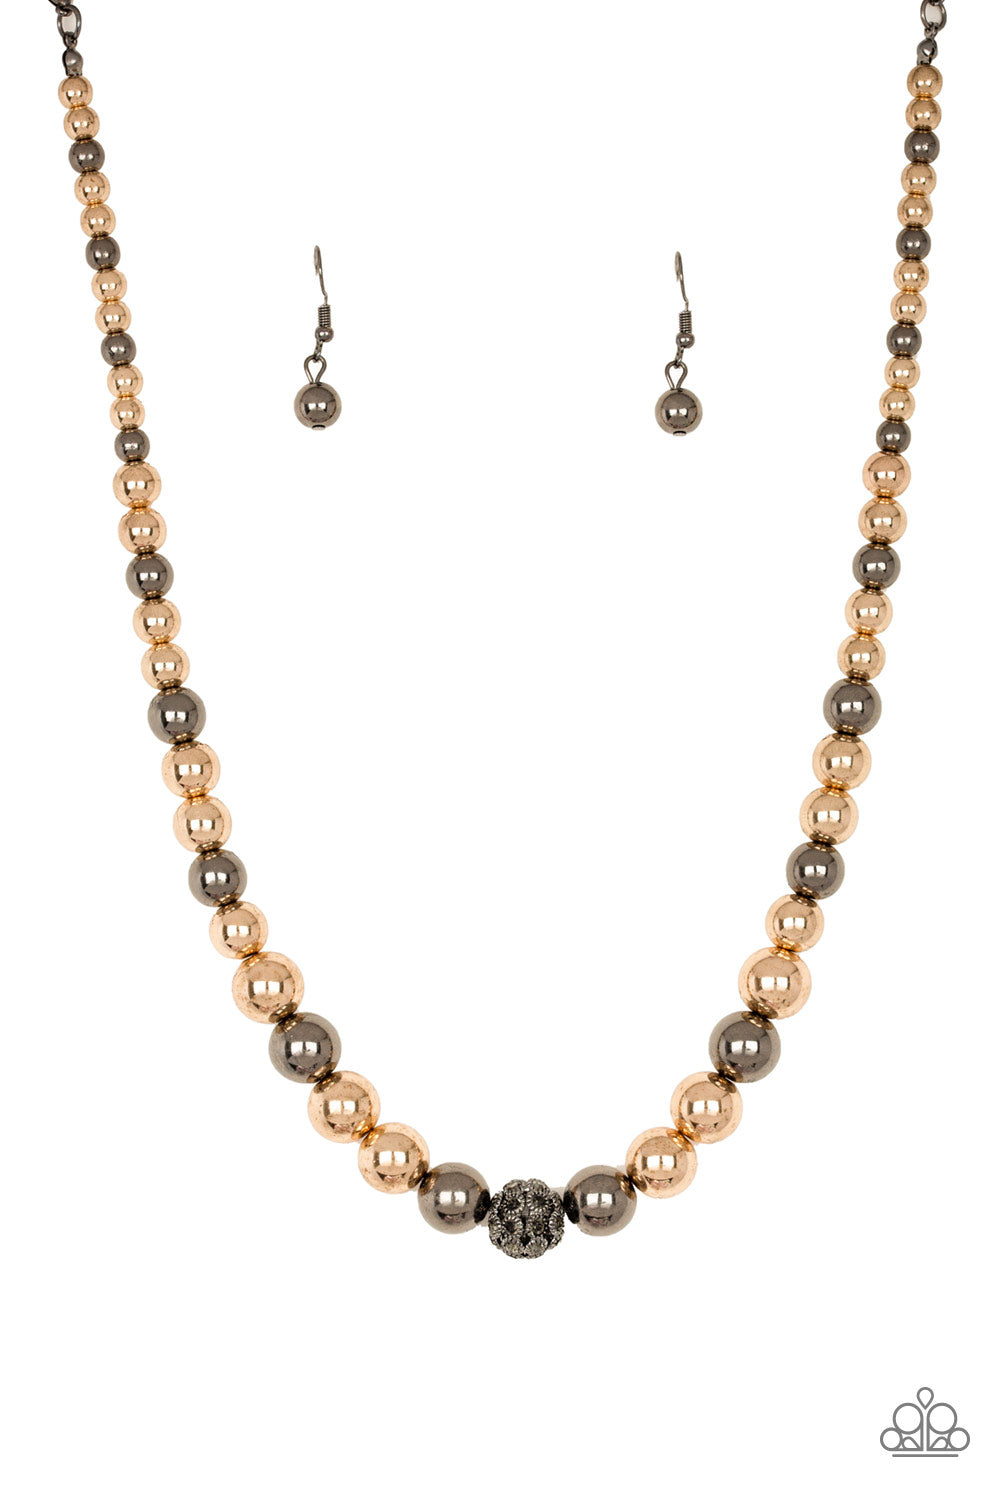 High-Stakes Fame - Multi Gold and Gunmetal Bead Necklaces gradually increasing in size near the center, glistening gold and gunmetal beads are threaded along an invisible wire below the collar. Encrusted in smoky rhinestones, a sparkling gunmetal bead adorns the center for a refined finish. Features an adjustable clasp closure.  Sold as one individual necklace. Includes one pair of matching earrings.